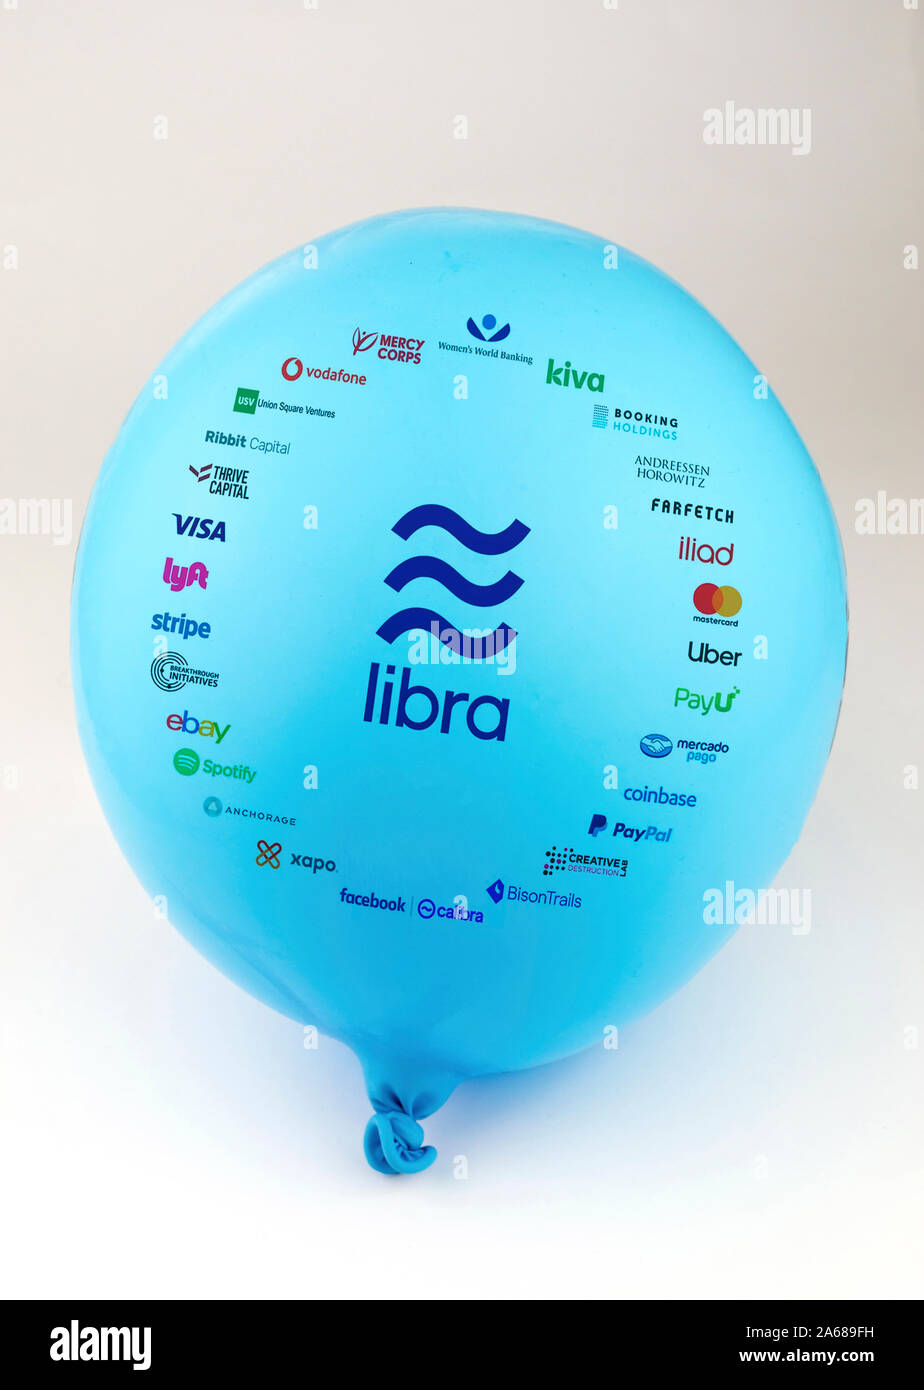 Libra Association logo printed on a balloon. The balloon is gradually deflating and losing its shape. Conceptual photo illustrative for Libra project. Stock Photo